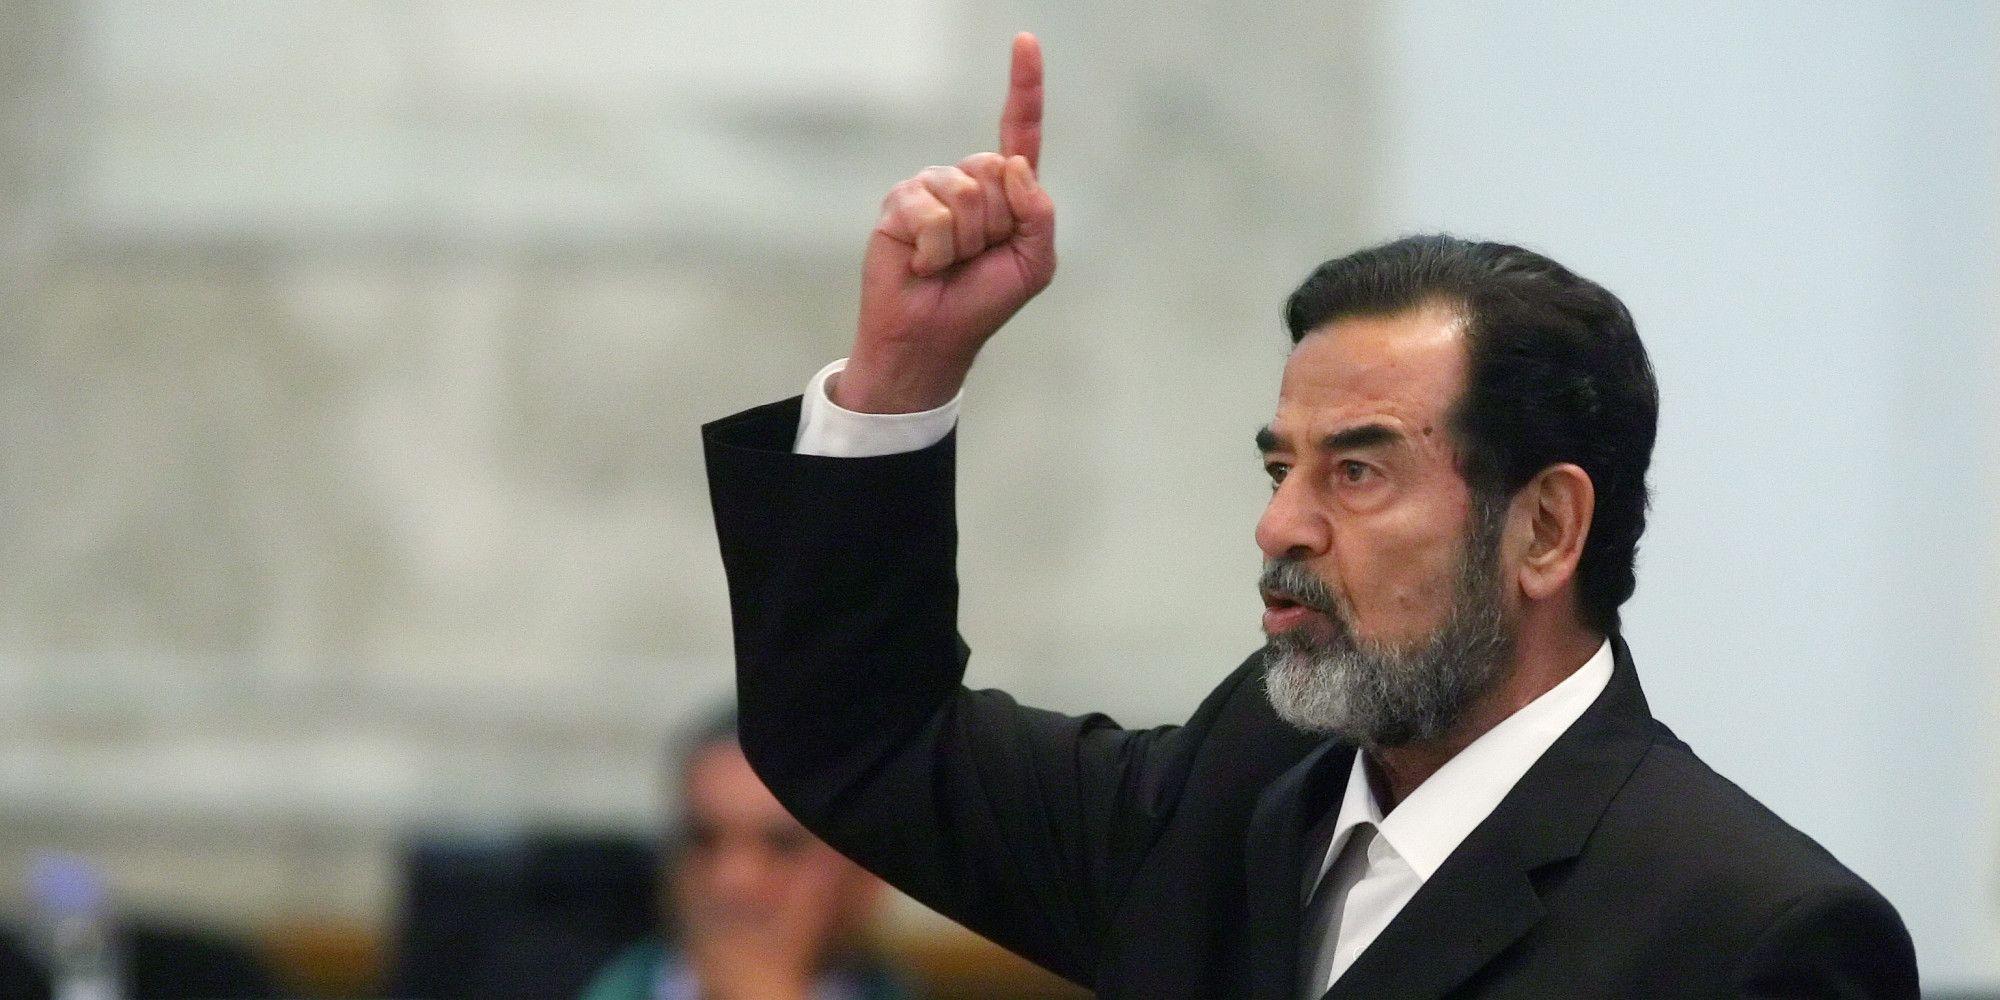 Saddam Hussein png images | PNGEgg